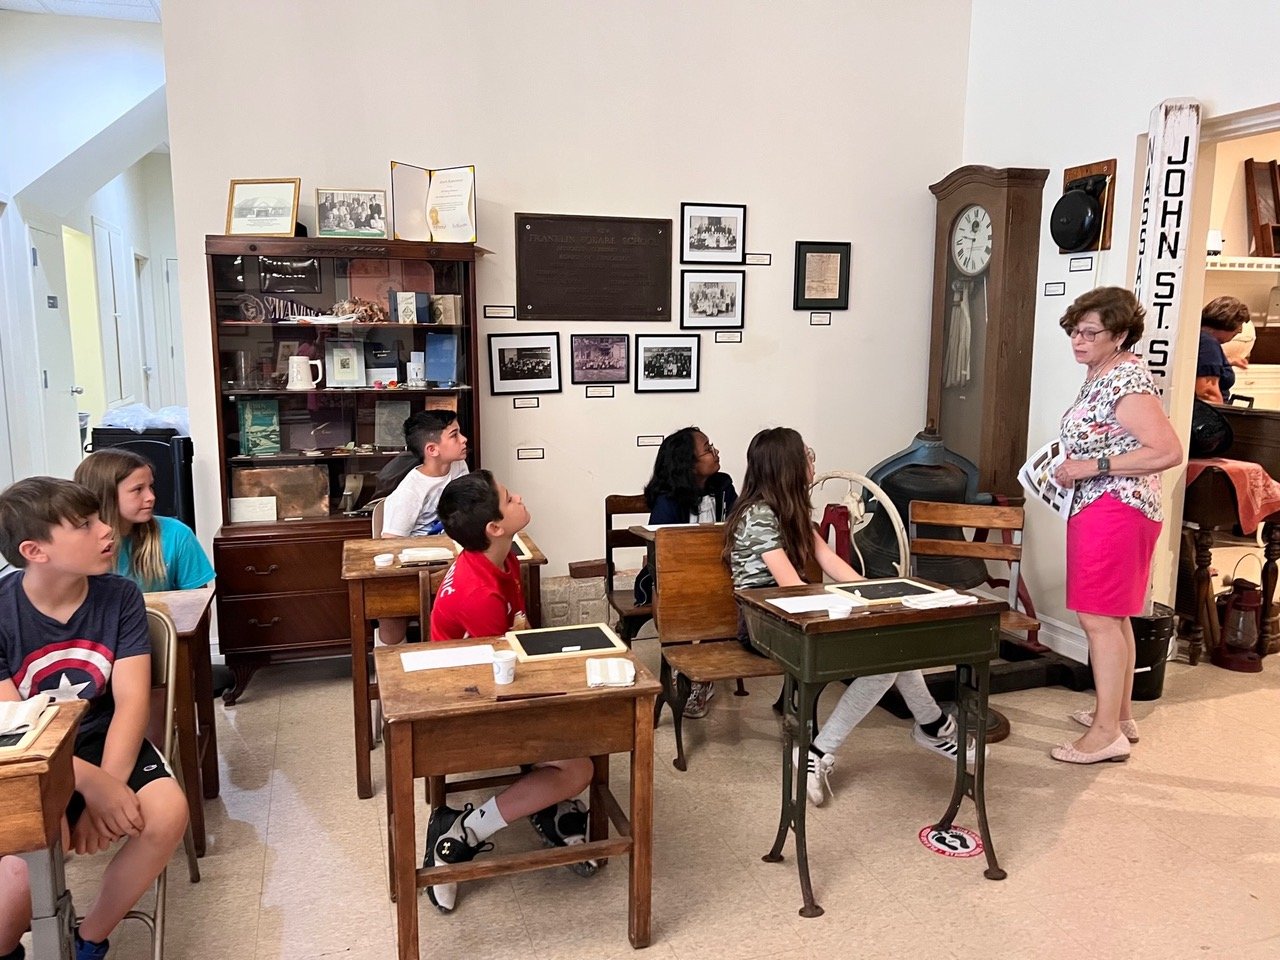 Students sat at desks used at Franklin Square schools up to 100 years ago and learned about the history of the former Monroe Street School in Franklin Square that was torn down in 1980.